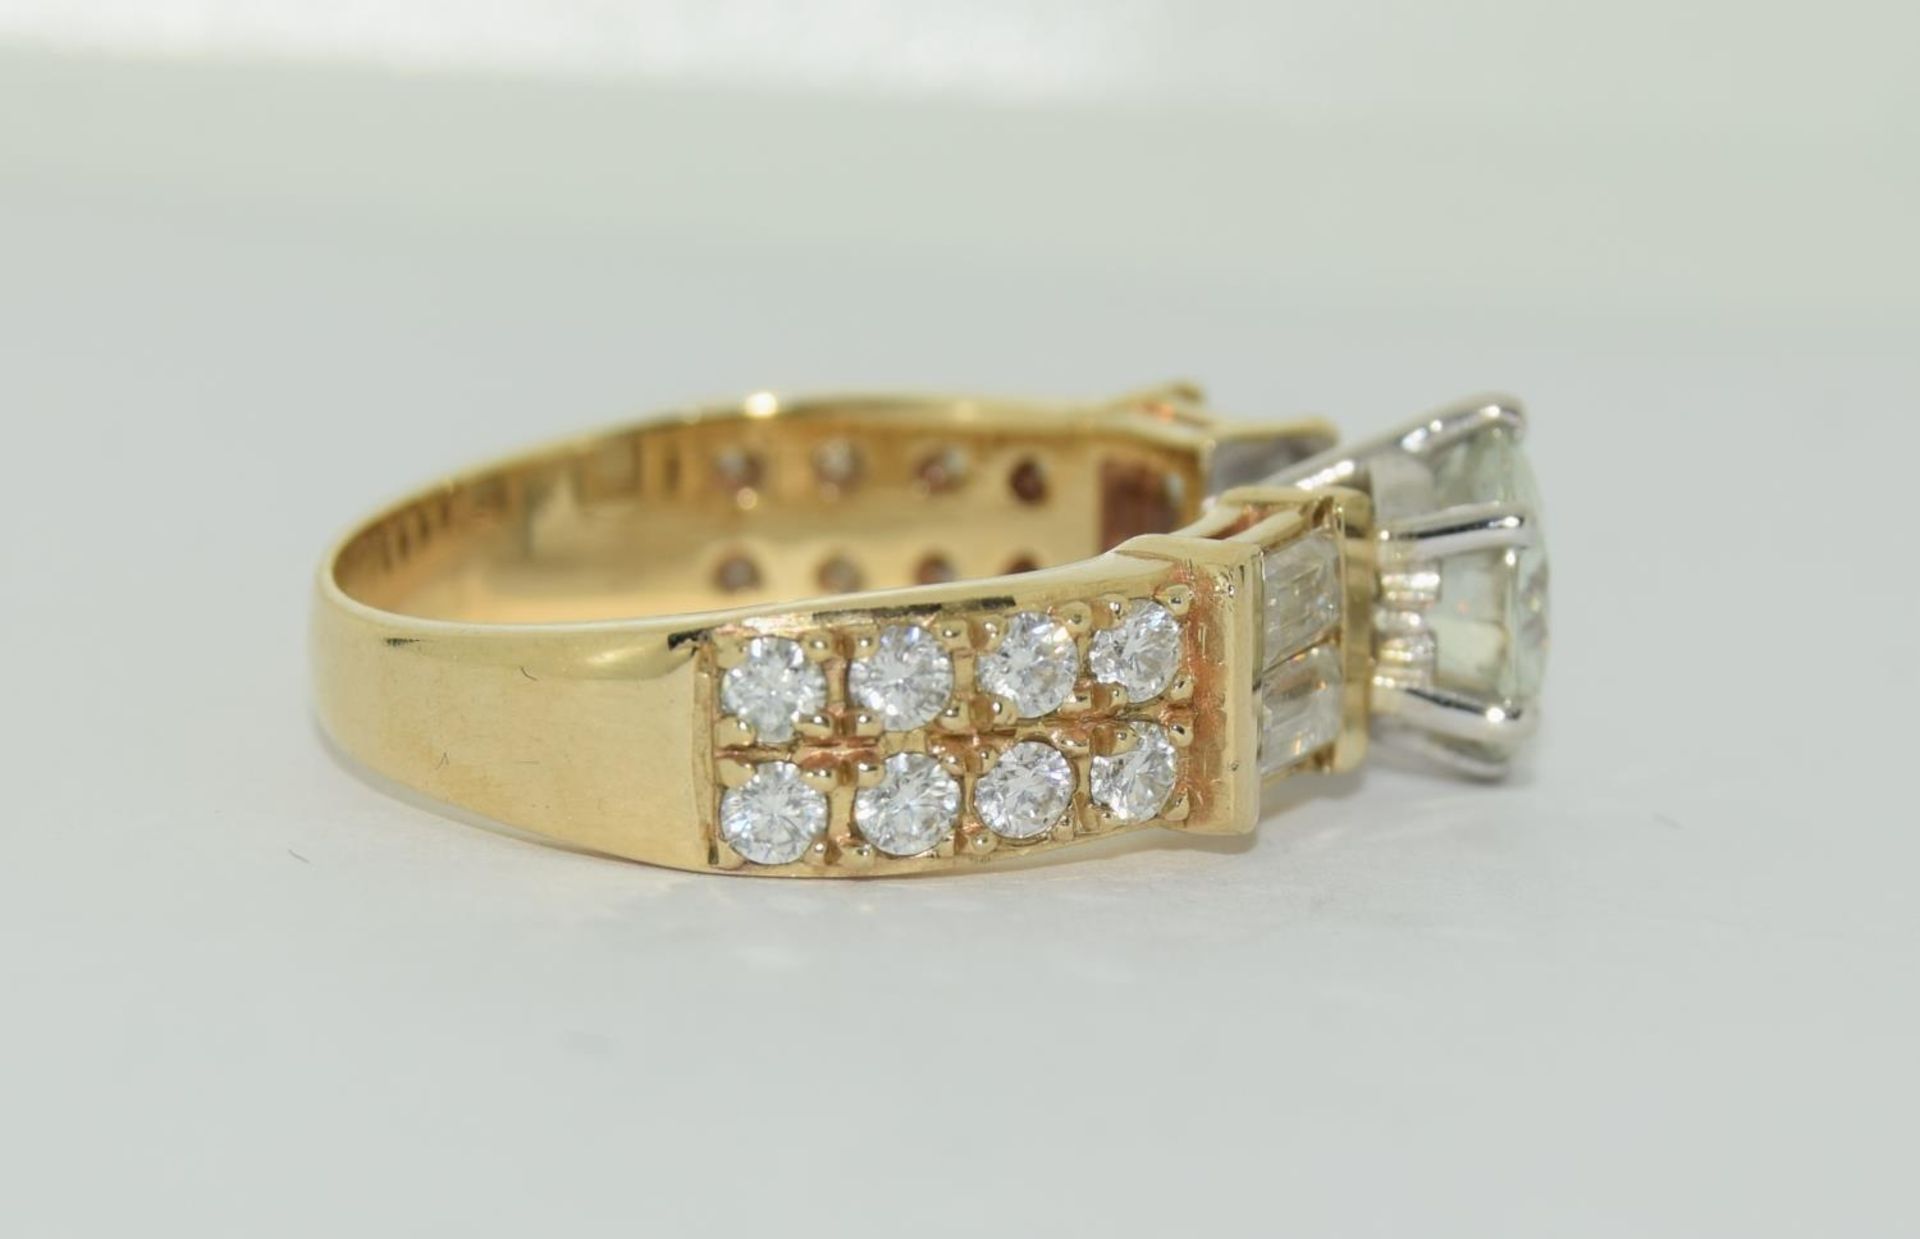 9ct gold Moissanite Diamond ring - 1.00ct centre stone, baguette/round stones on sides. Size M+. - Image 2 of 5